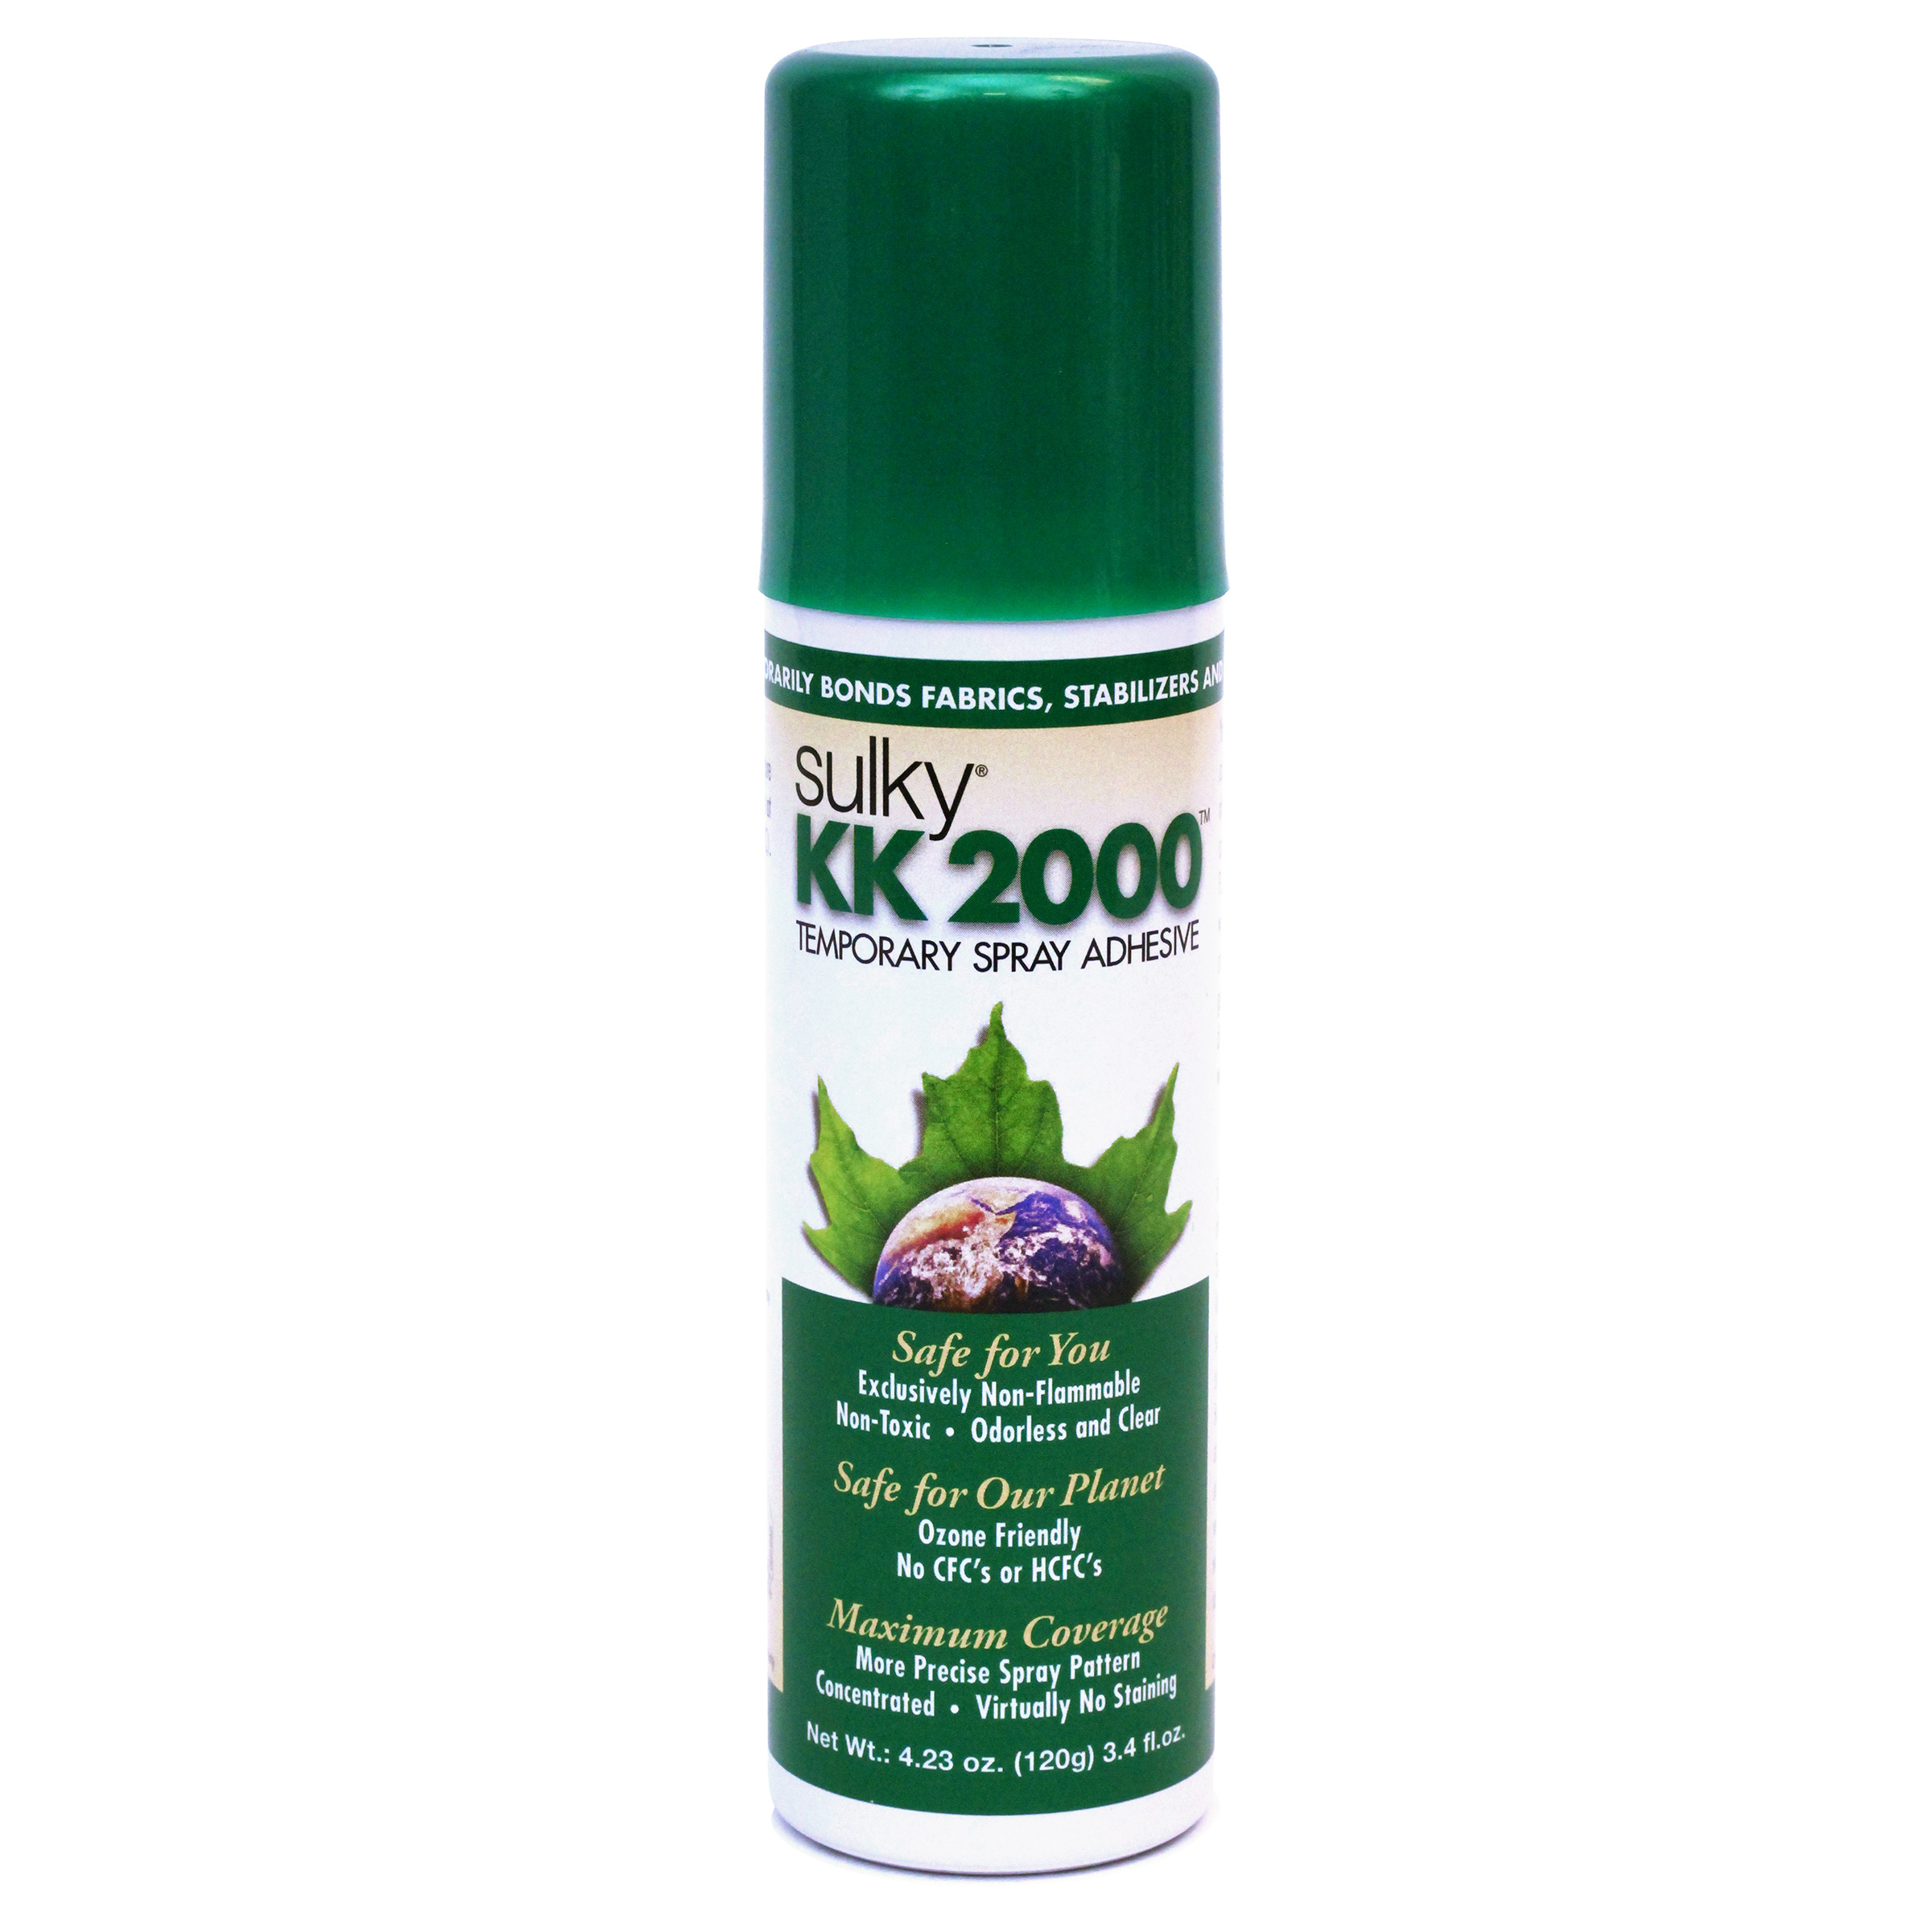 The KK 2000 can is smaller than other spray adhesives. Am I still getting the same amount of product?